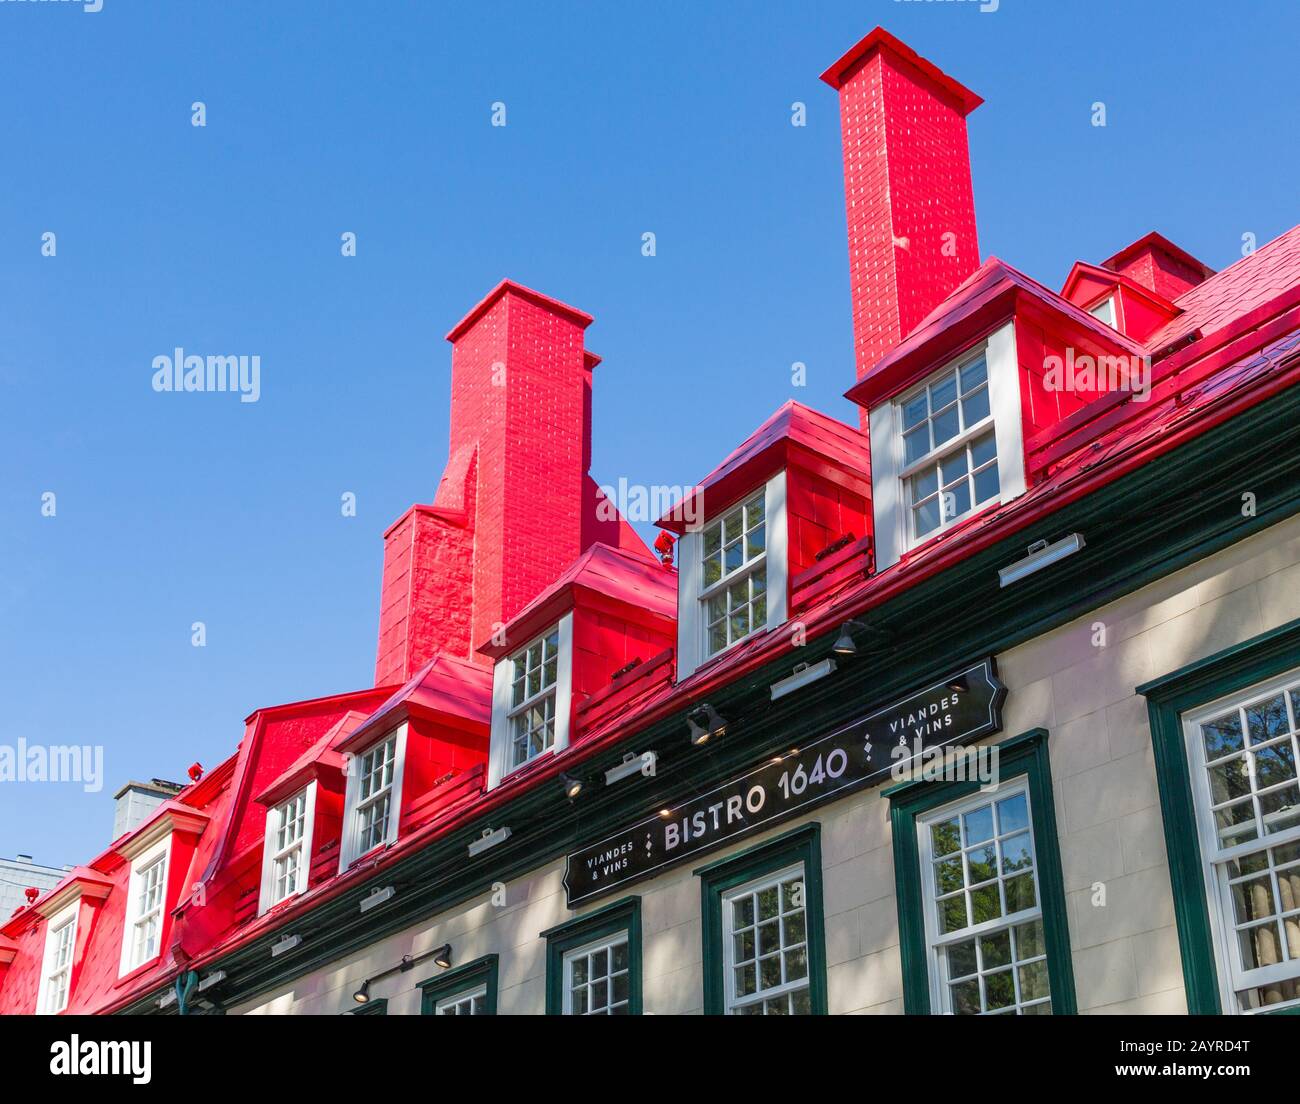 QUEBEC CITY, CANADA - September 16, 2018: Quebec City is known for its Winter Carnival, summer music festival and Saint-Jean-Baptiste Day. In addition Stock Photo